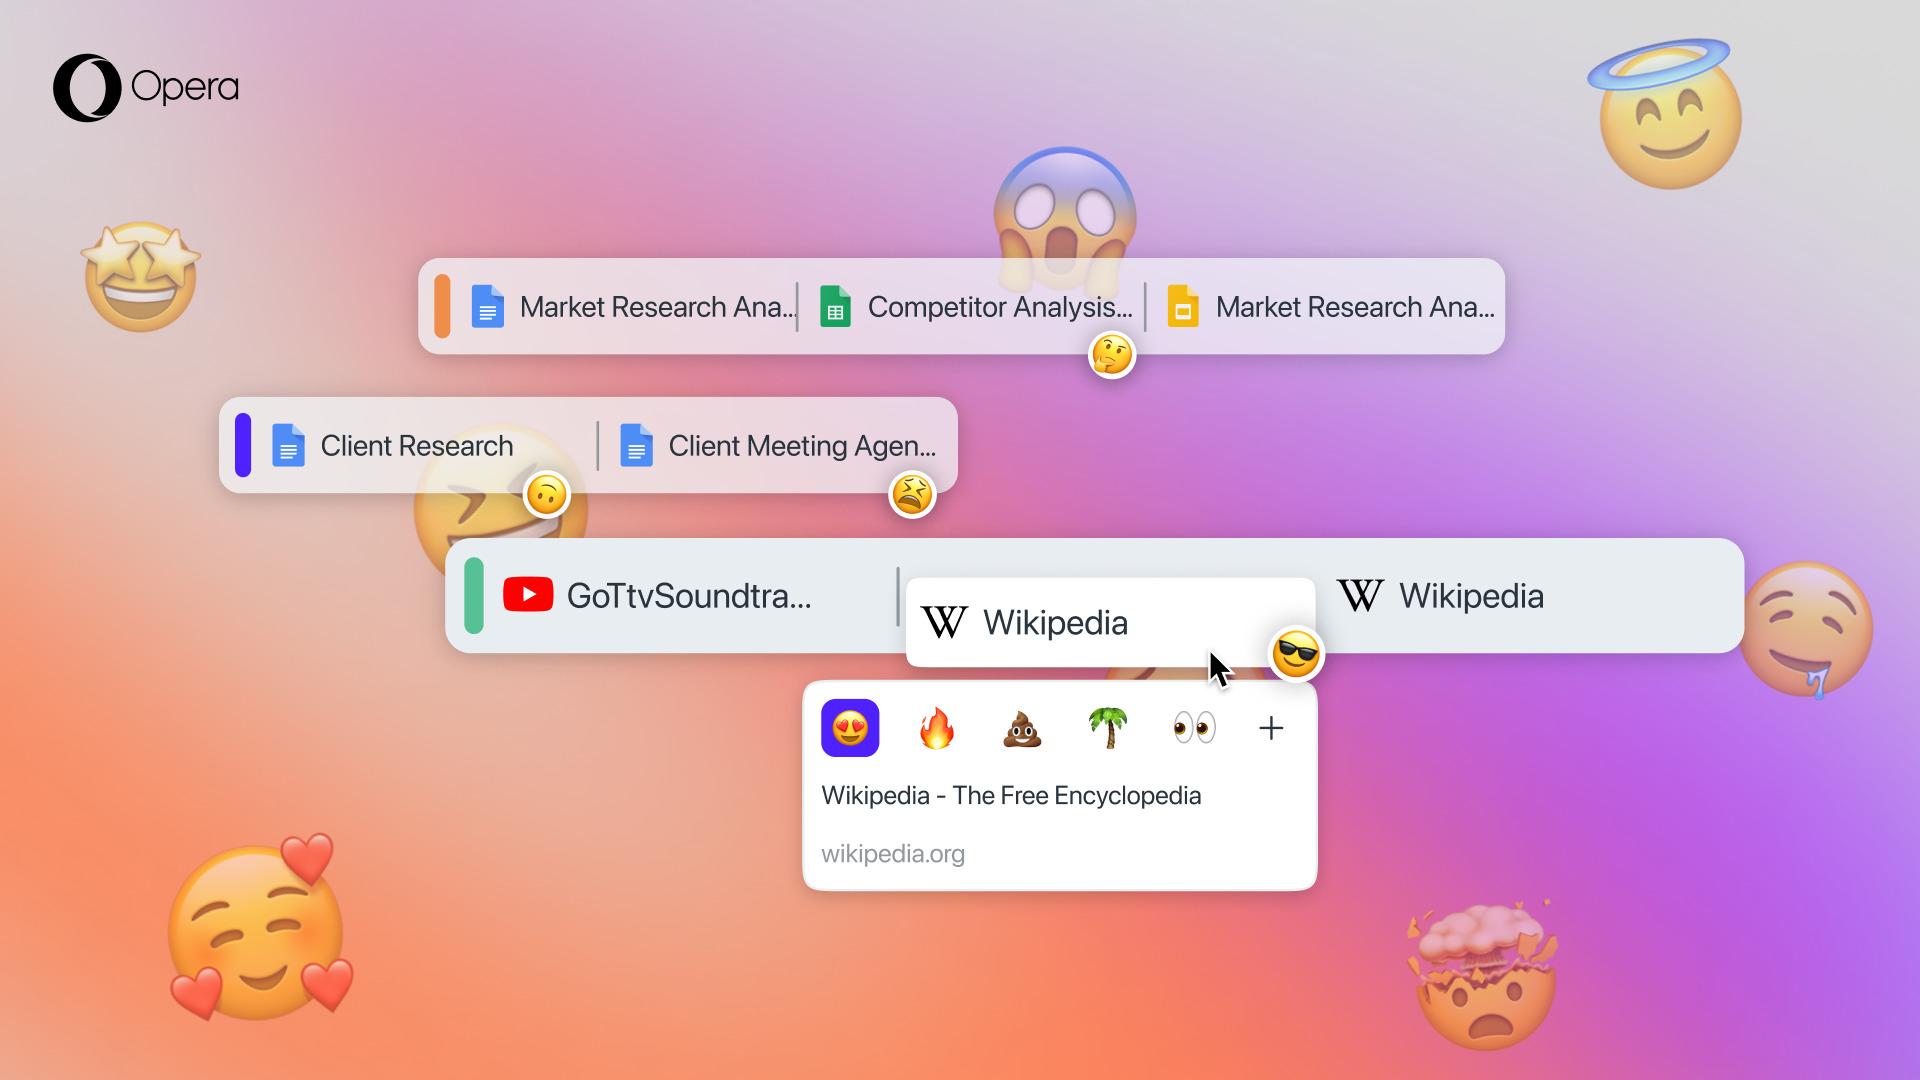 You can now decorate your tabs with Emojis in Opera browser for desktop.